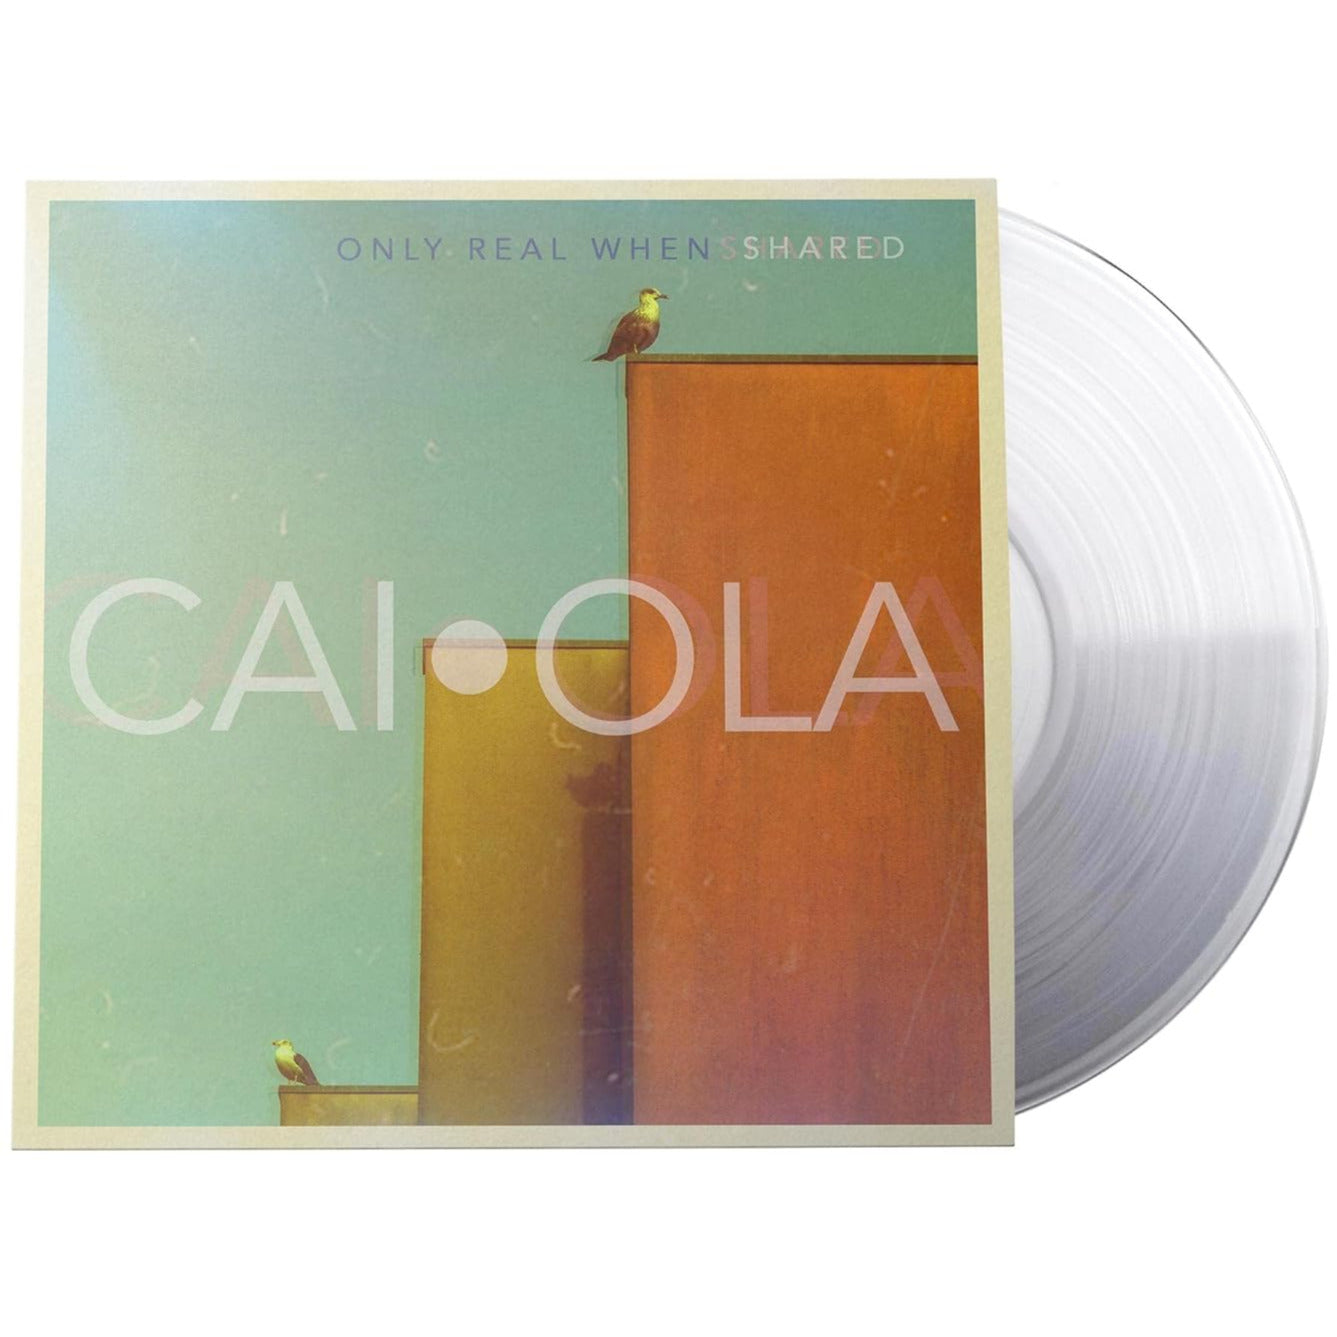 Caiola - Only Real When Shared (Limited Edition, GVR, Clear Vinyl) (LP) - Joco Records